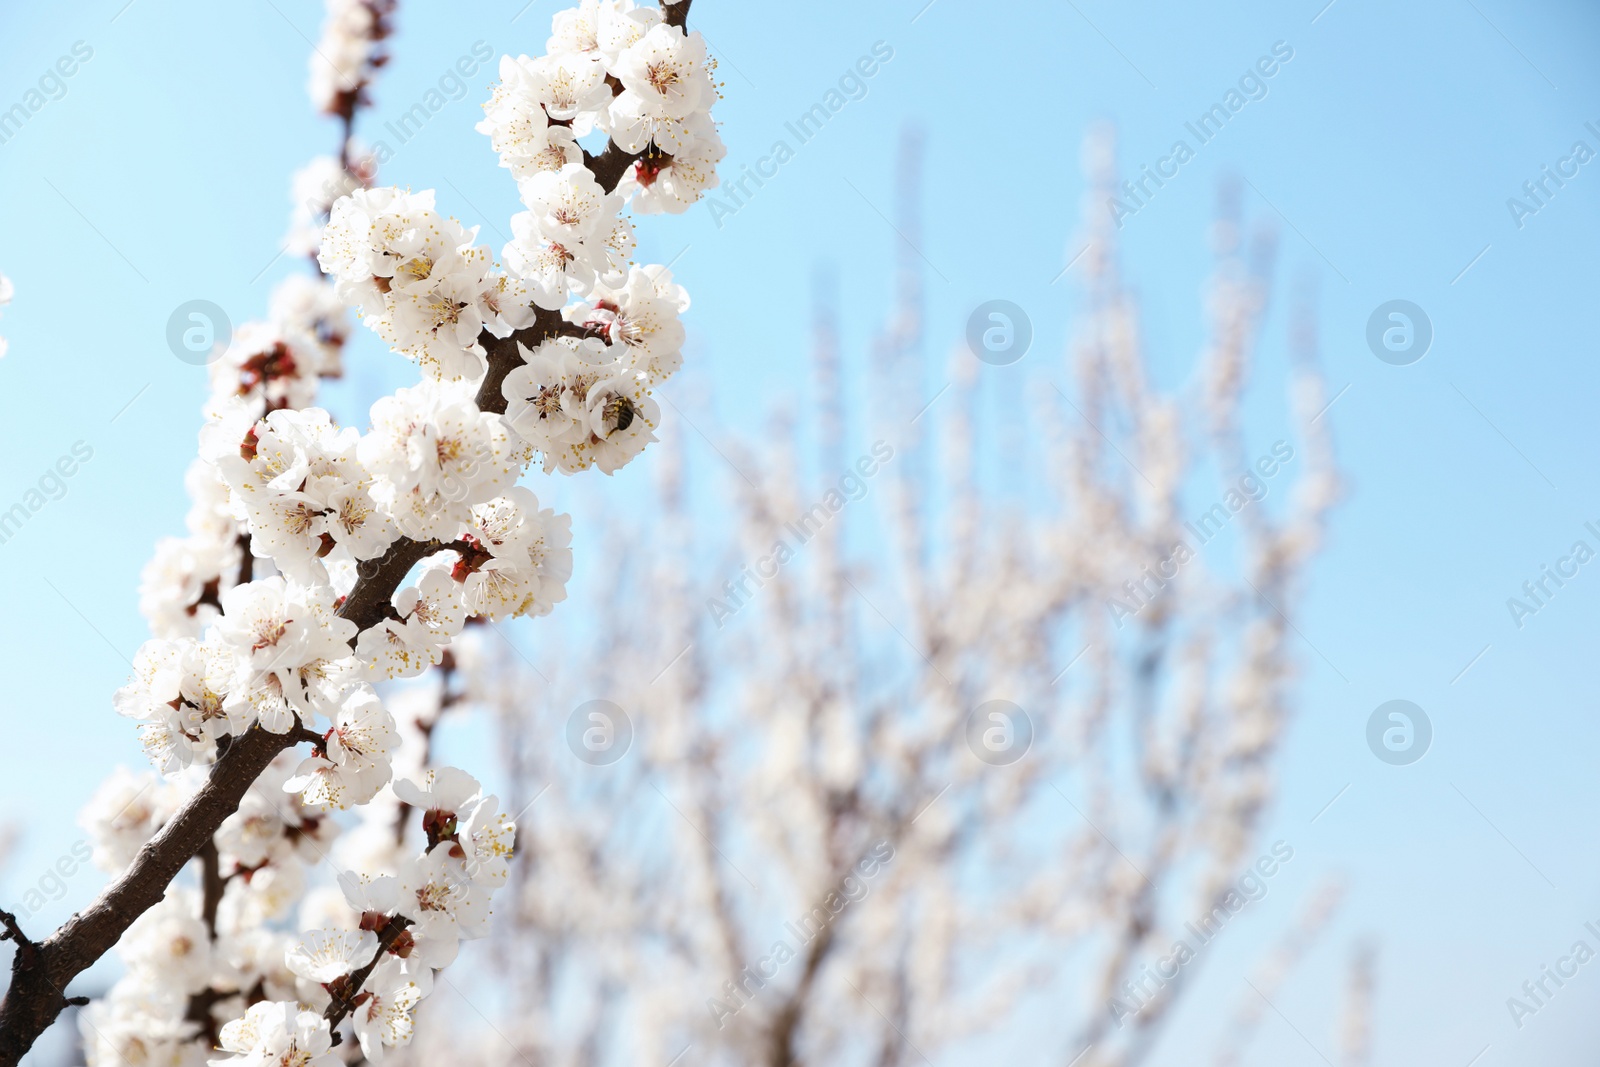 Photo of Beautiful apricot tree branches with tiny tender flowers against blue sky, space for text. Awesome spring blossom